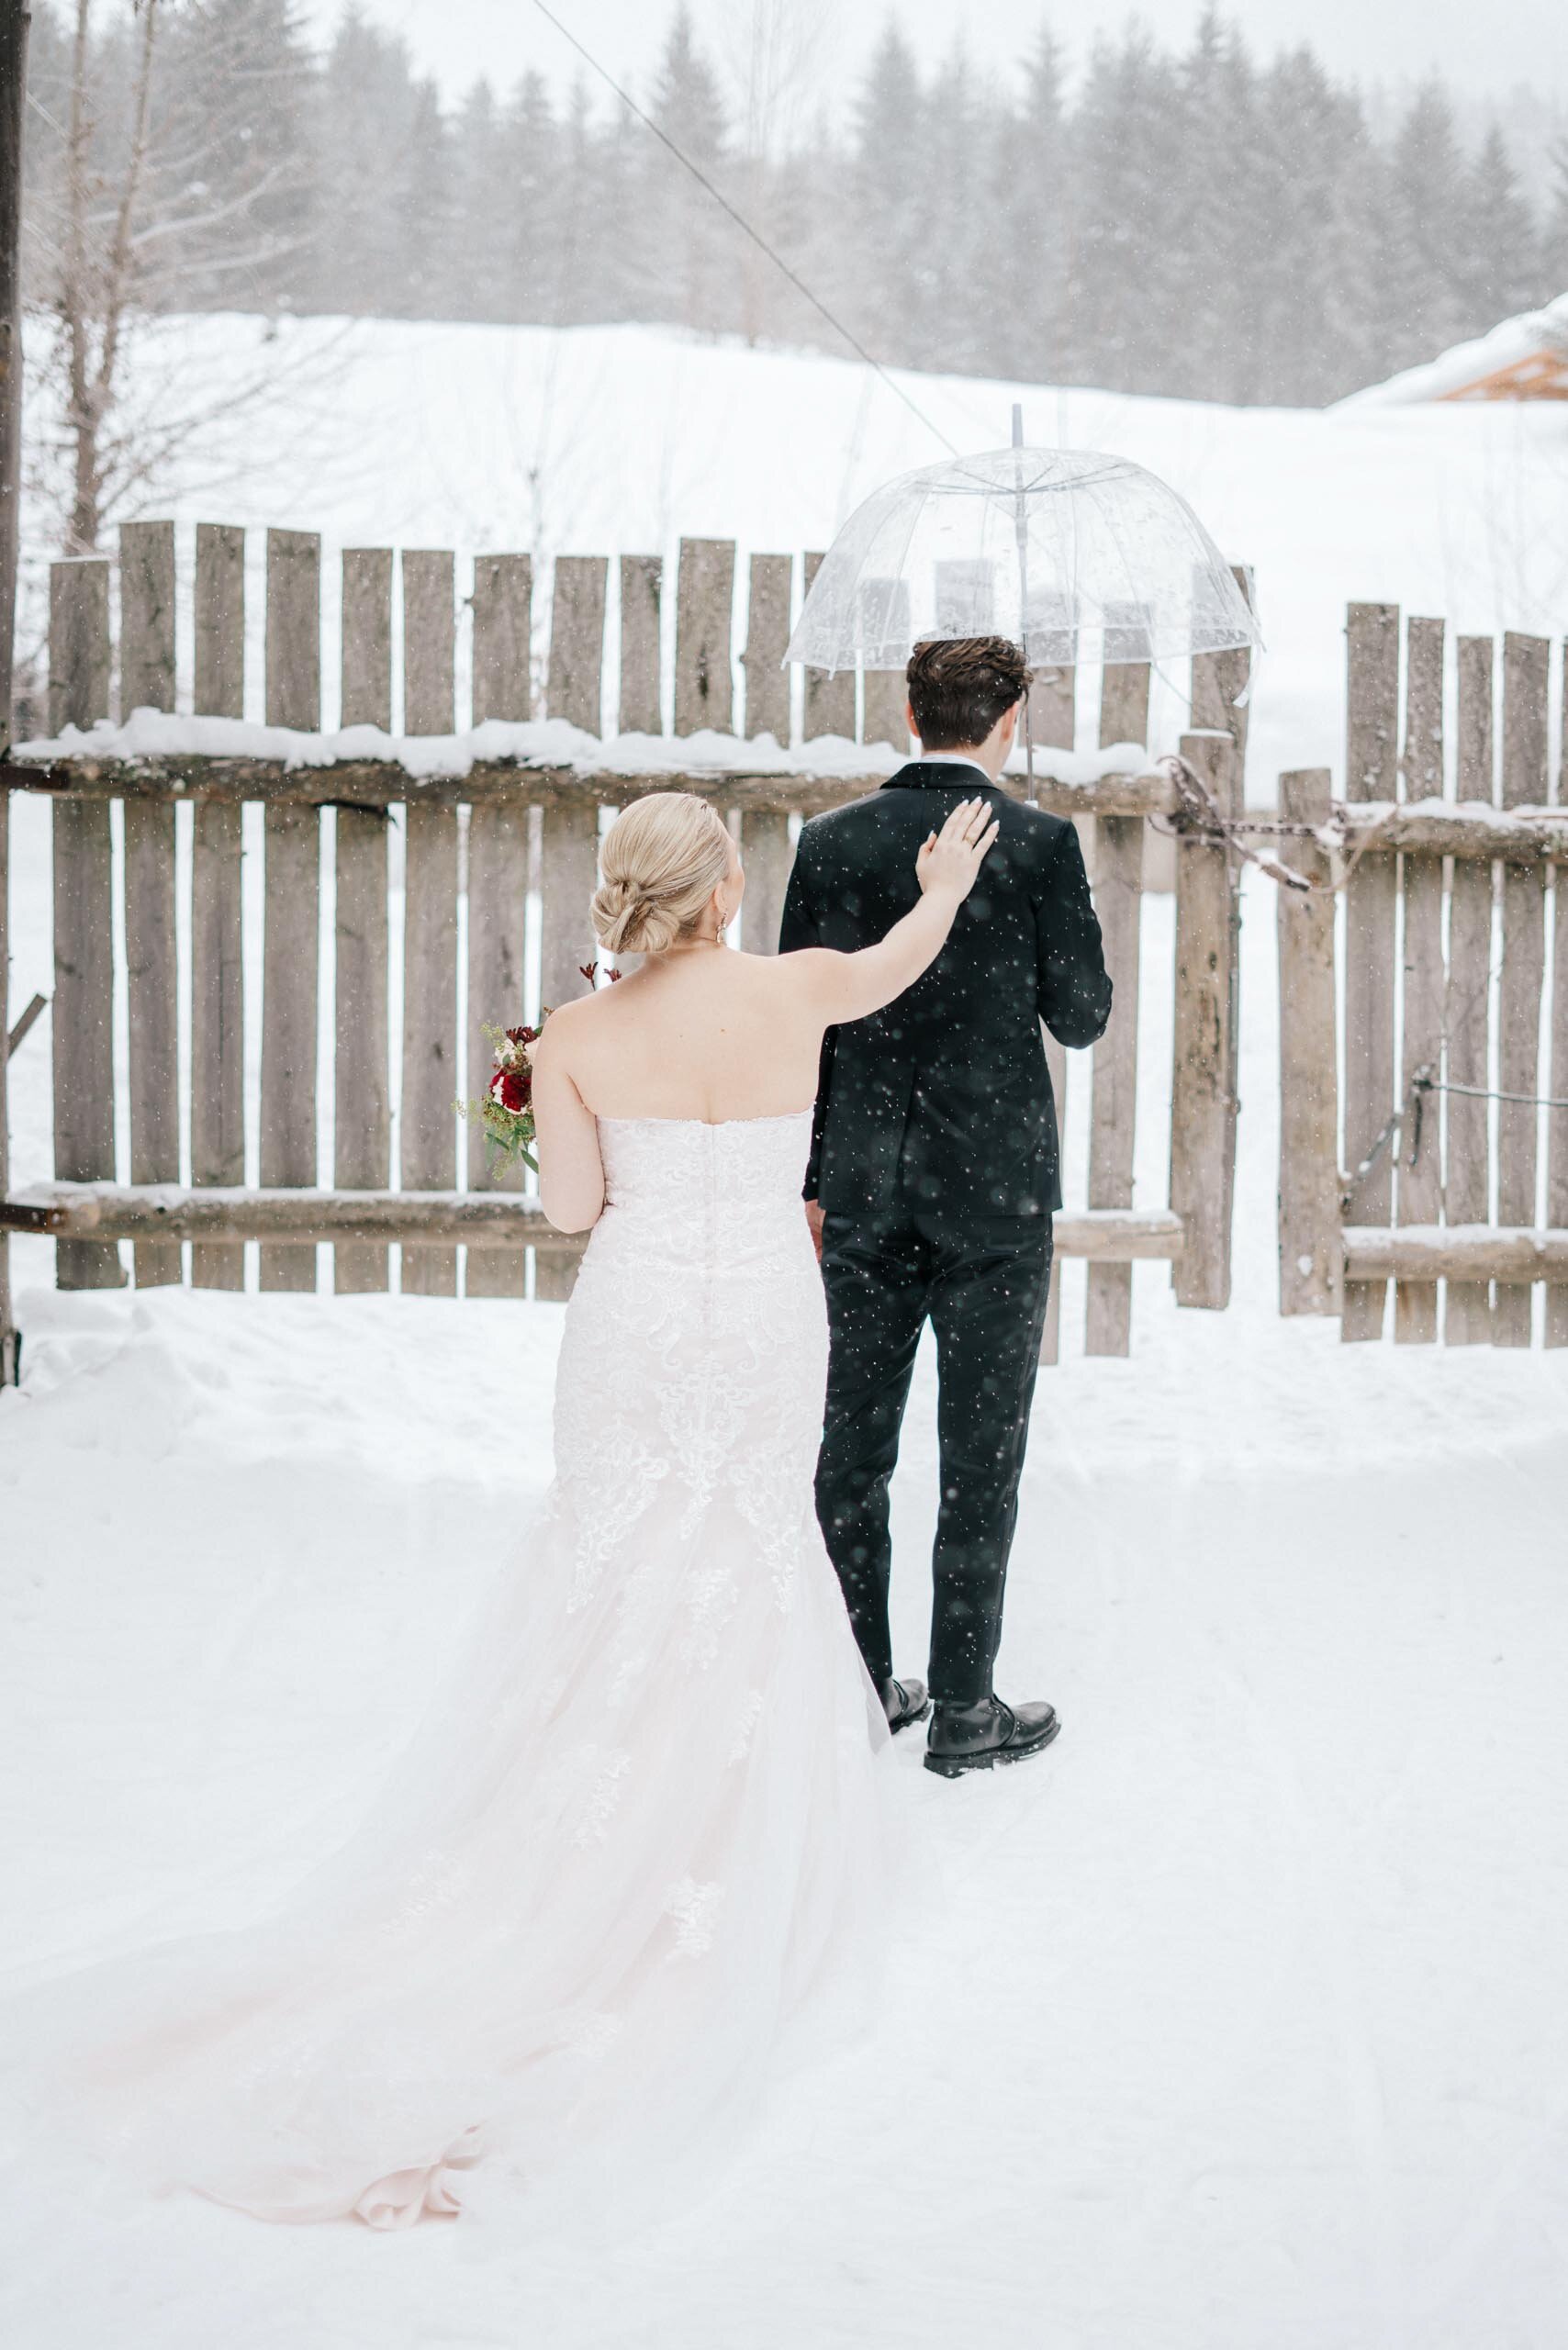 A bride in a long white dress with a lace train, taps her groom on the shoulder as the snow sprinkles. 